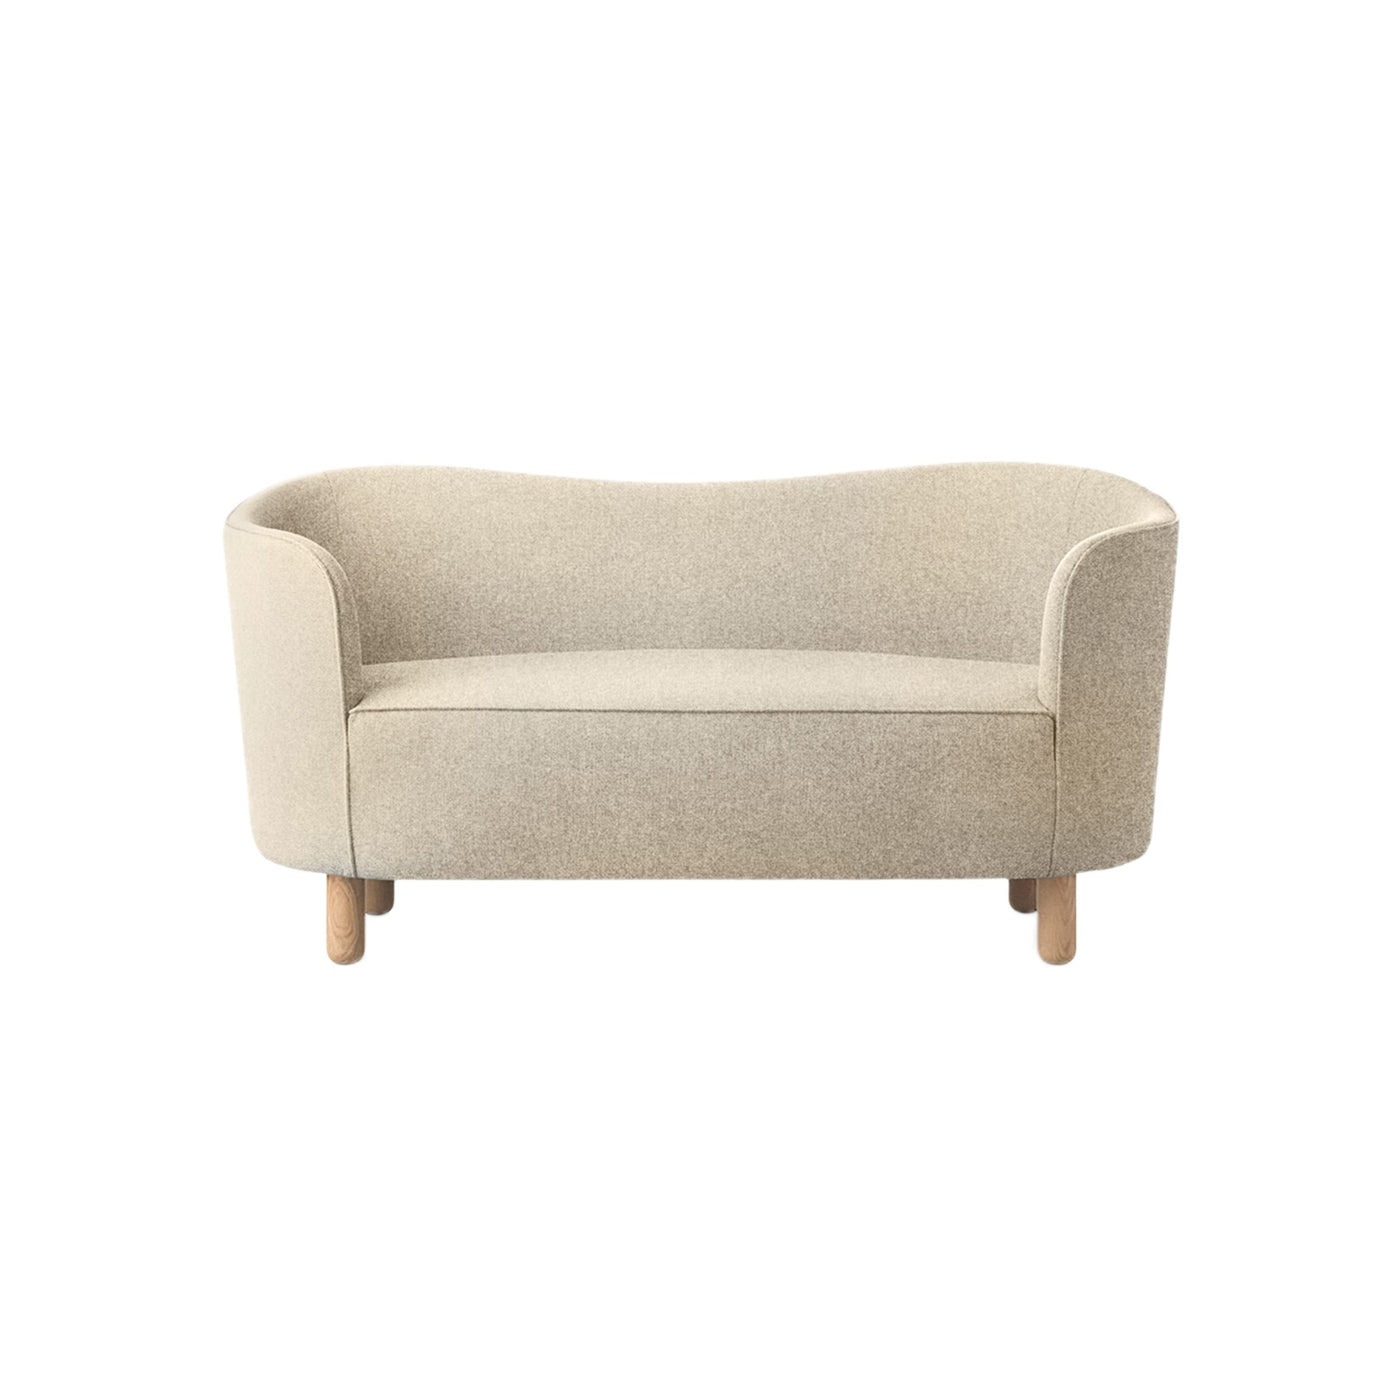 By Lassen Mingle sofa with natural oak legs. Made to order from someday designs. #colour_sahco-zero-1